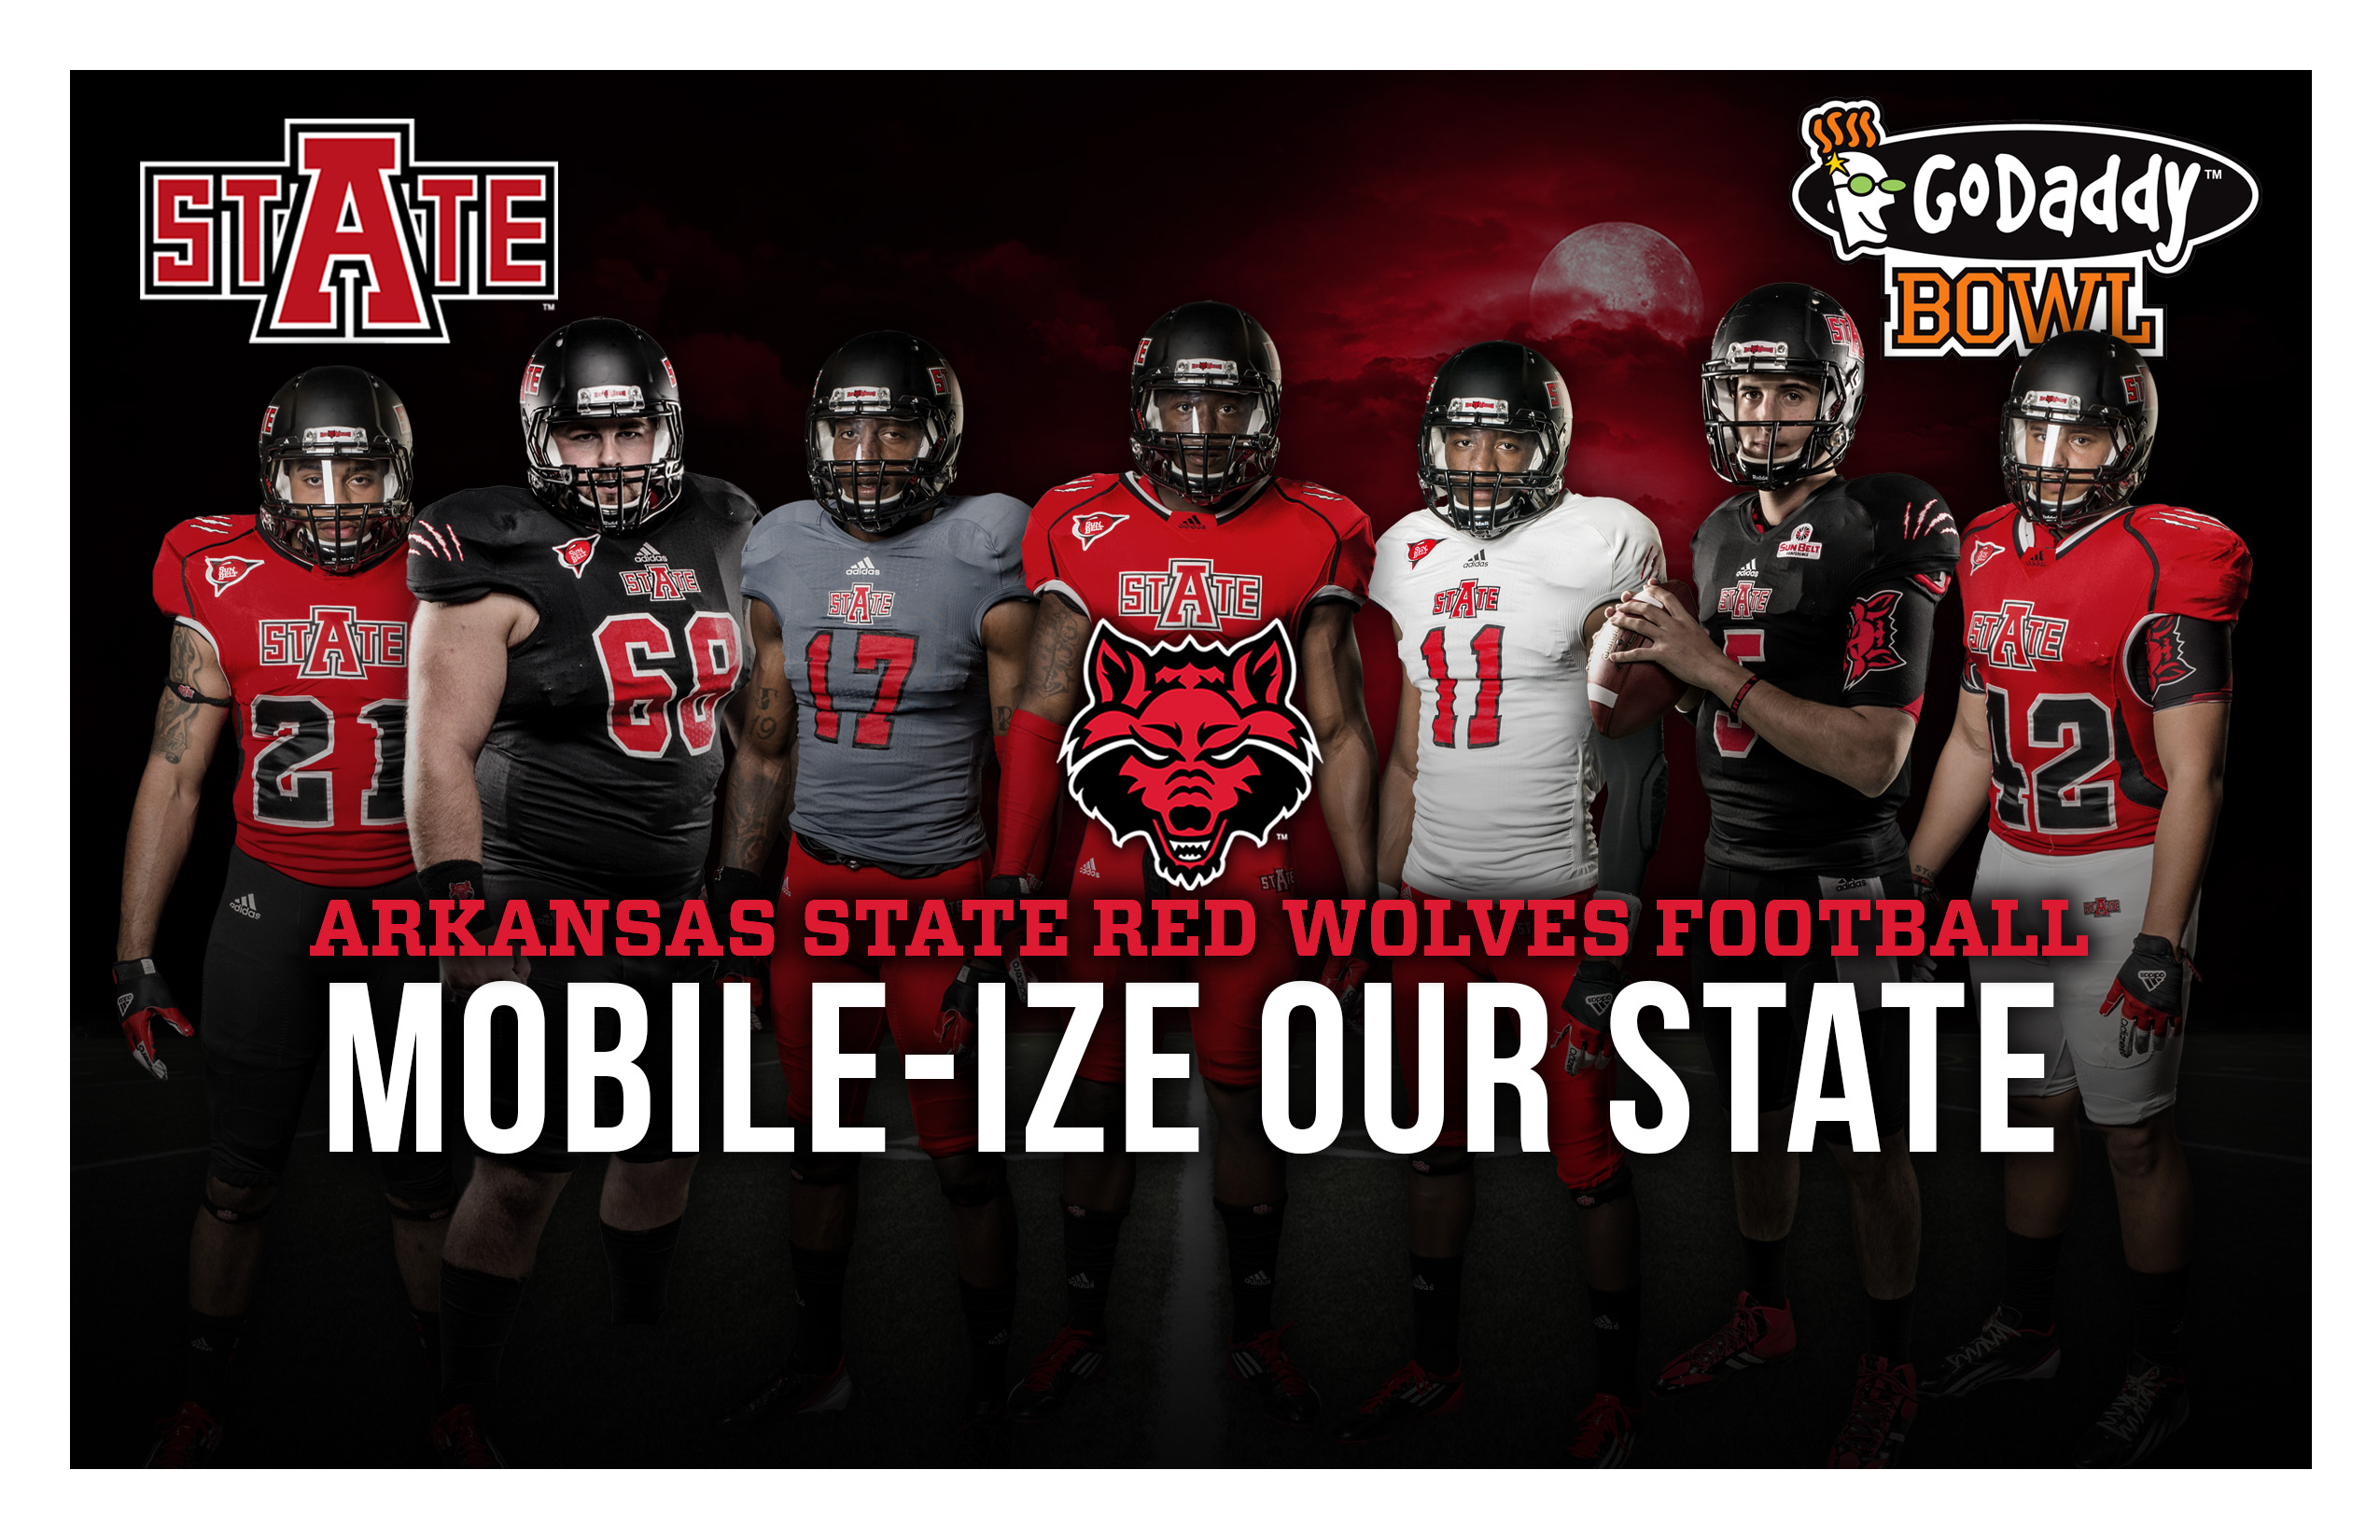 Mobile-ize Our State